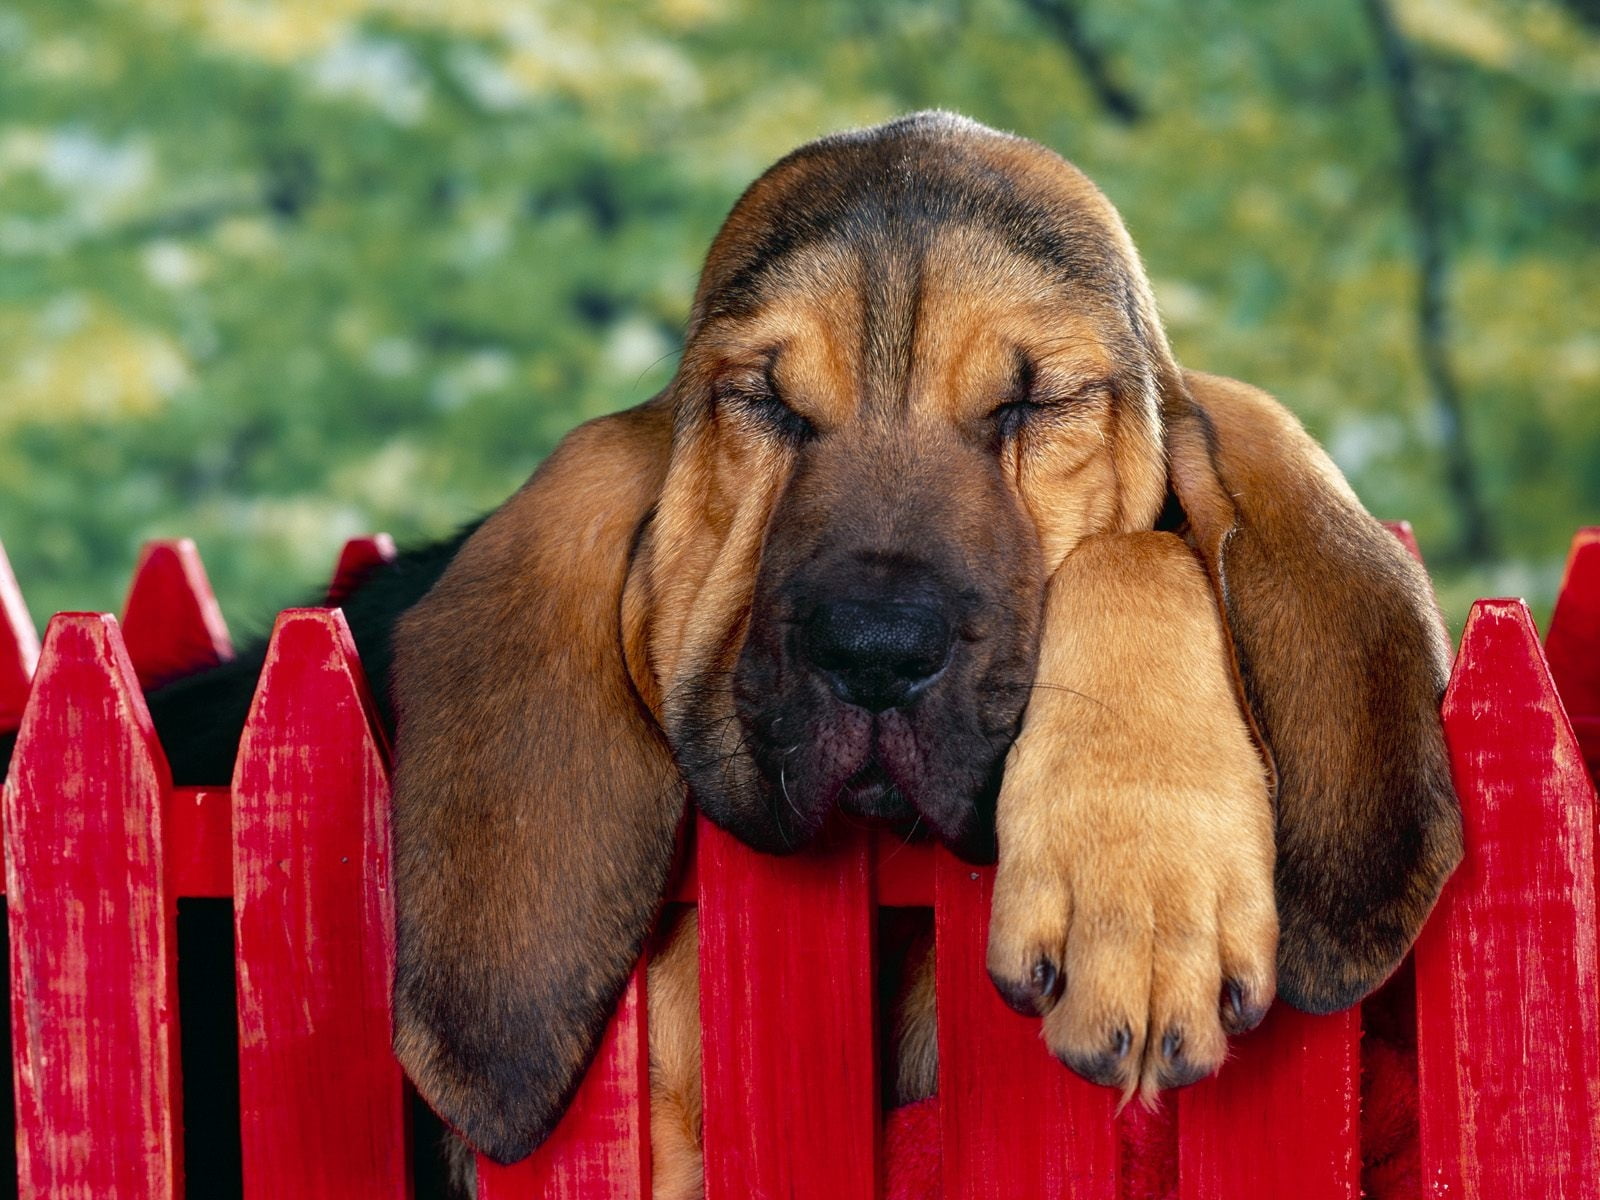 Black and tan basset hound lying inside the red play fence at daytime ...